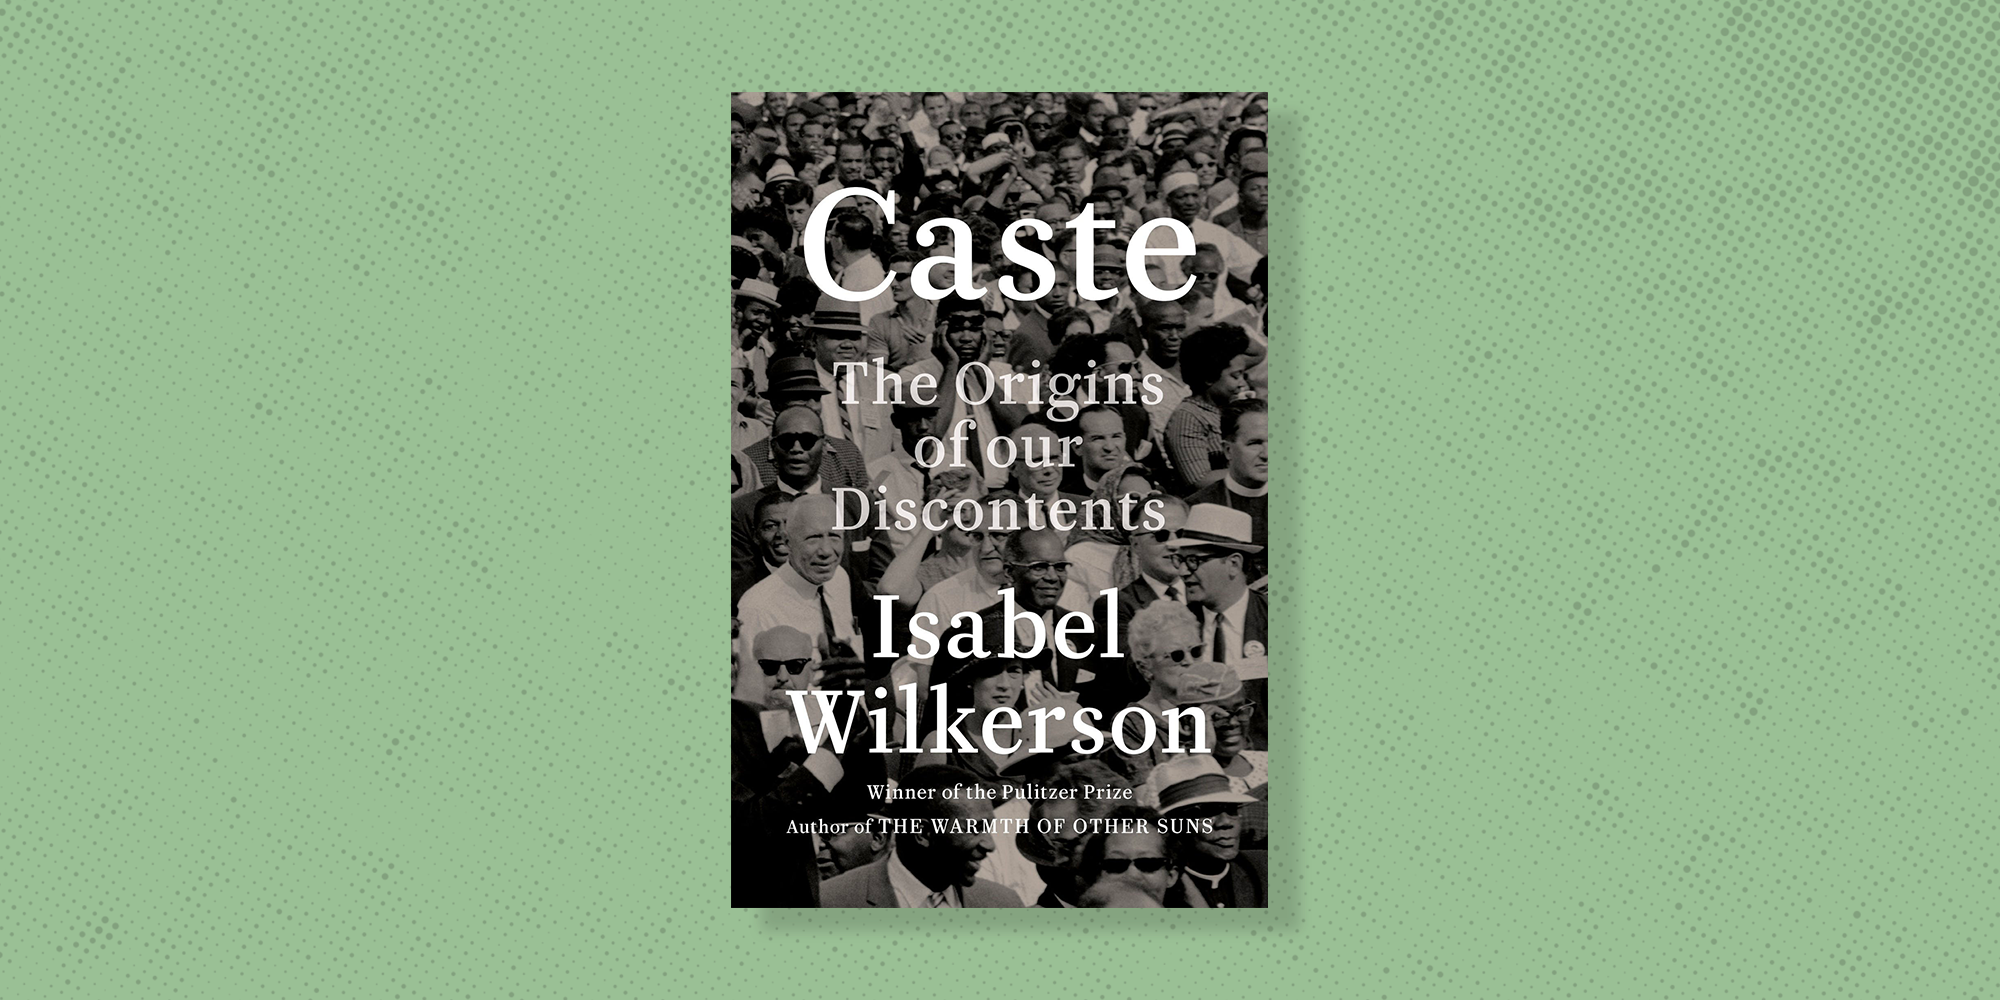 Caste: The Origins of Our Discontents a book by Isabel Wilkerson